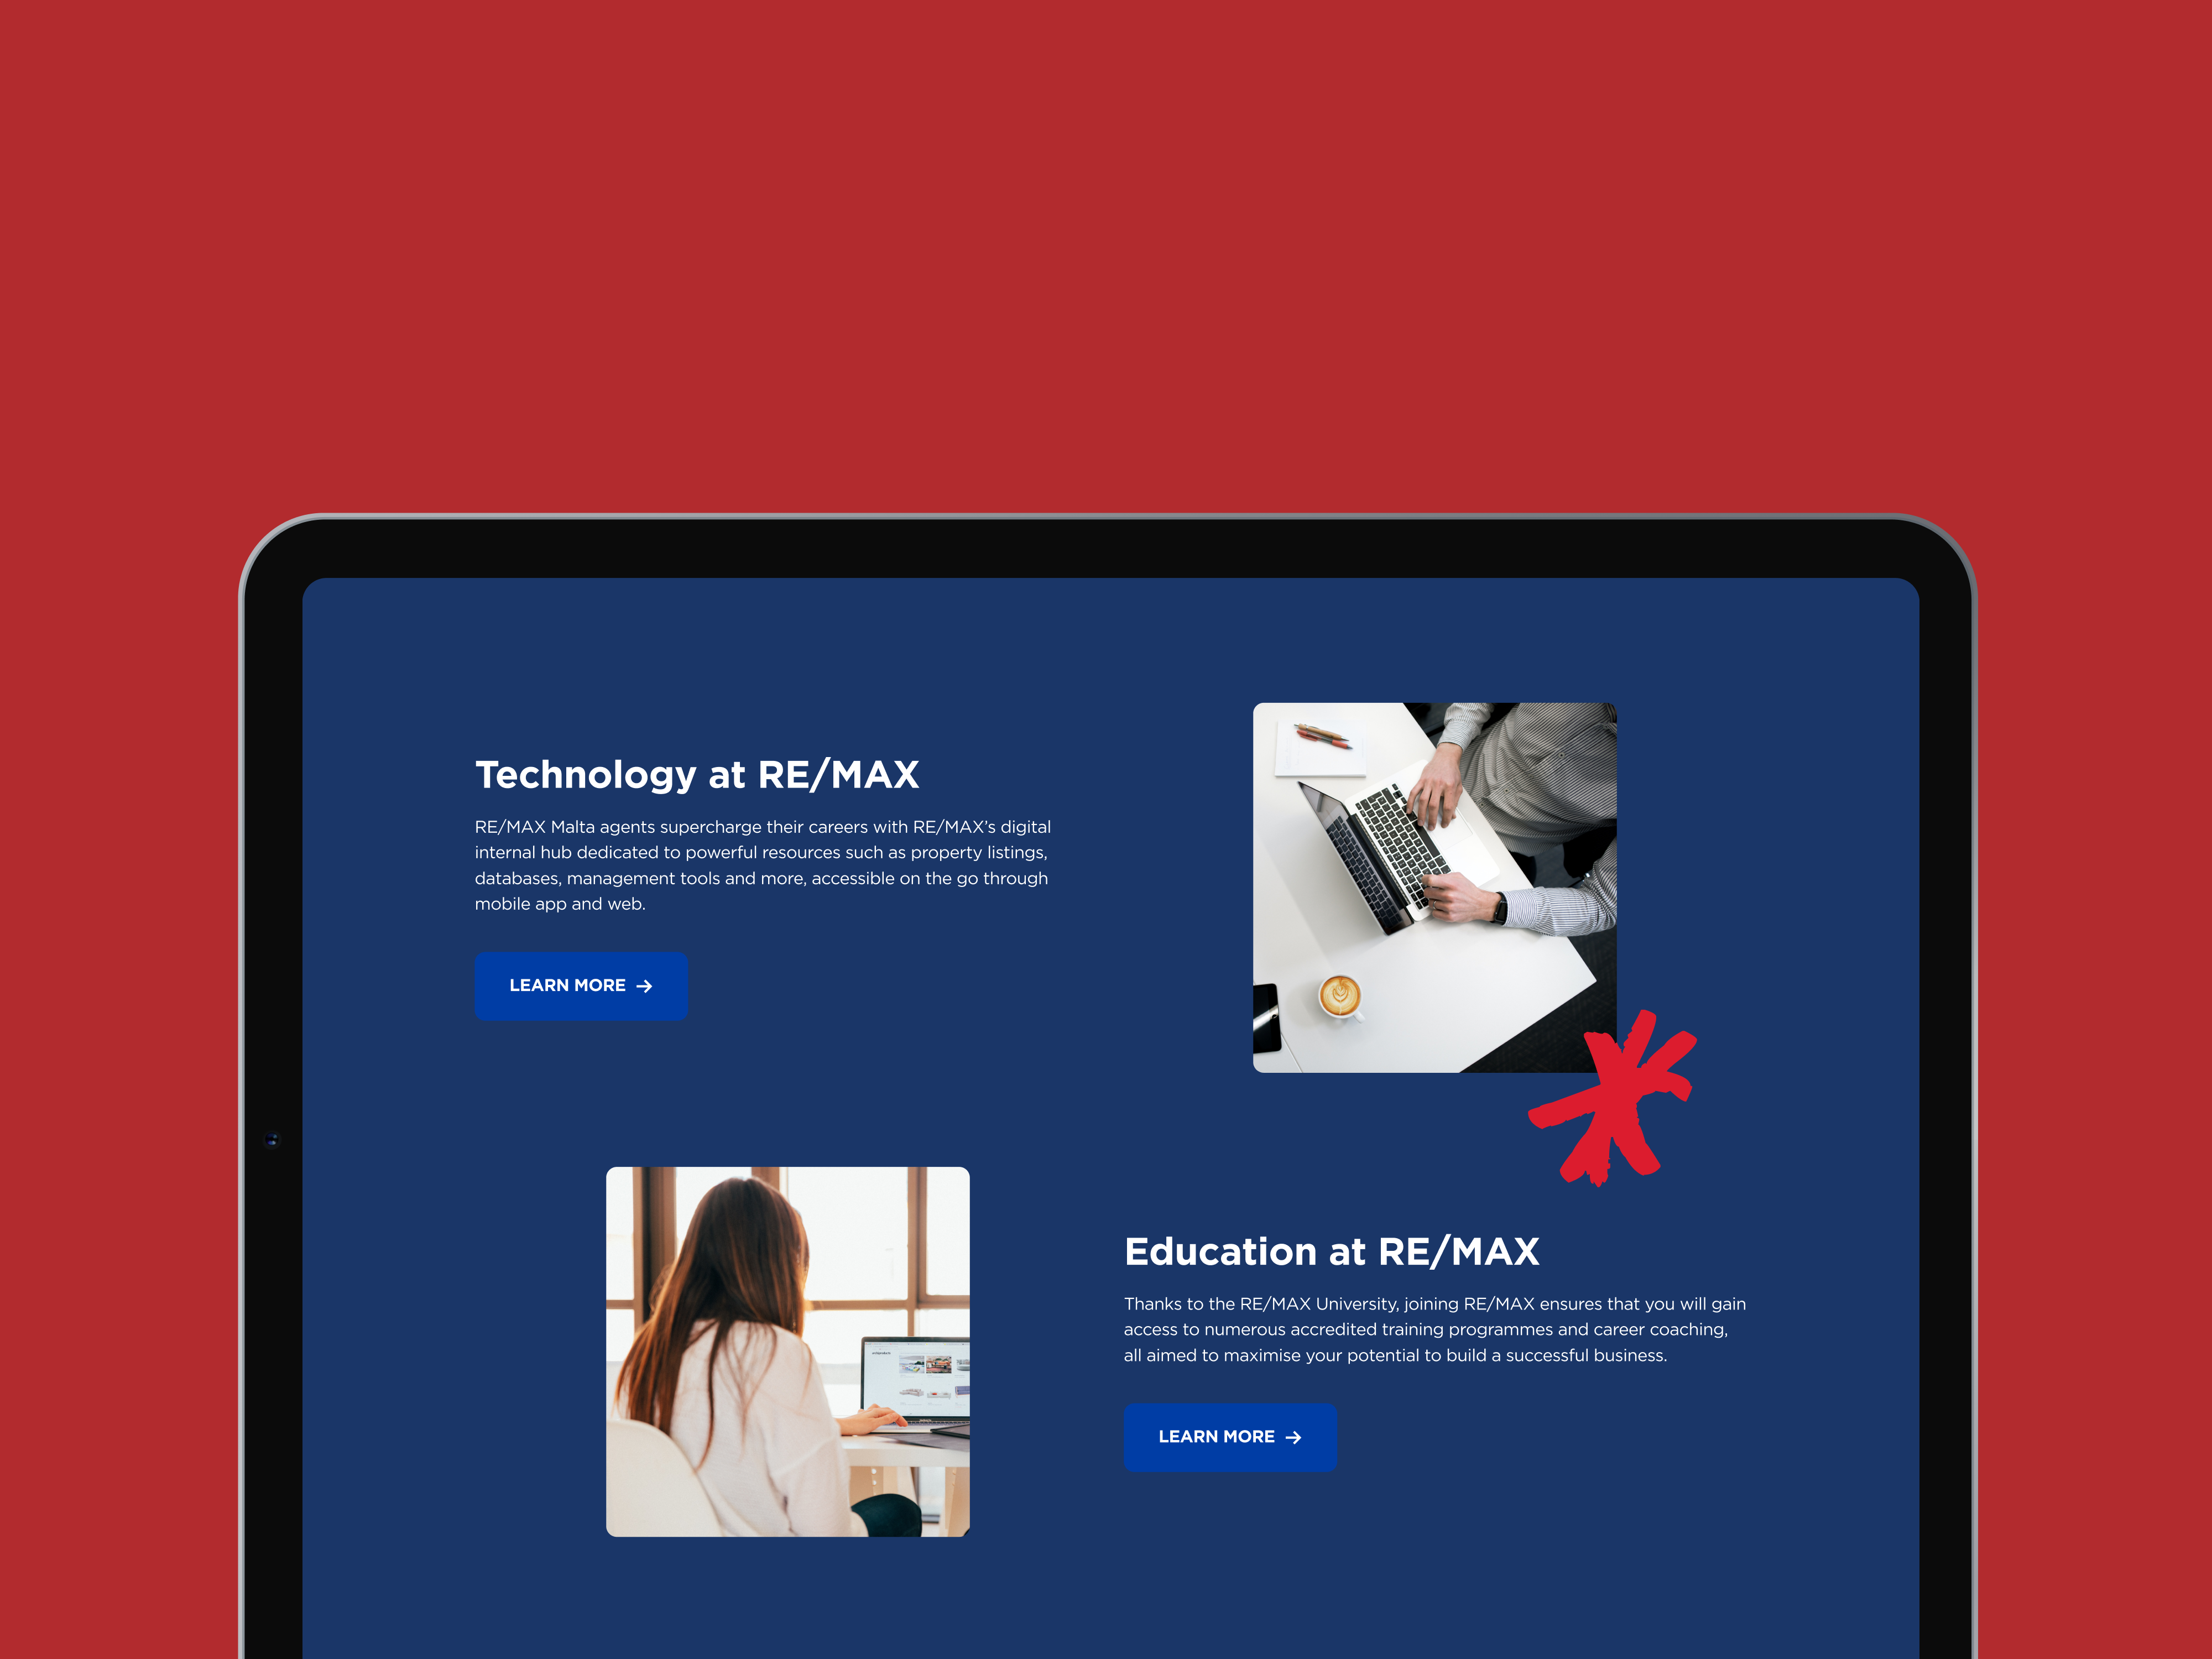 Remax technology & education